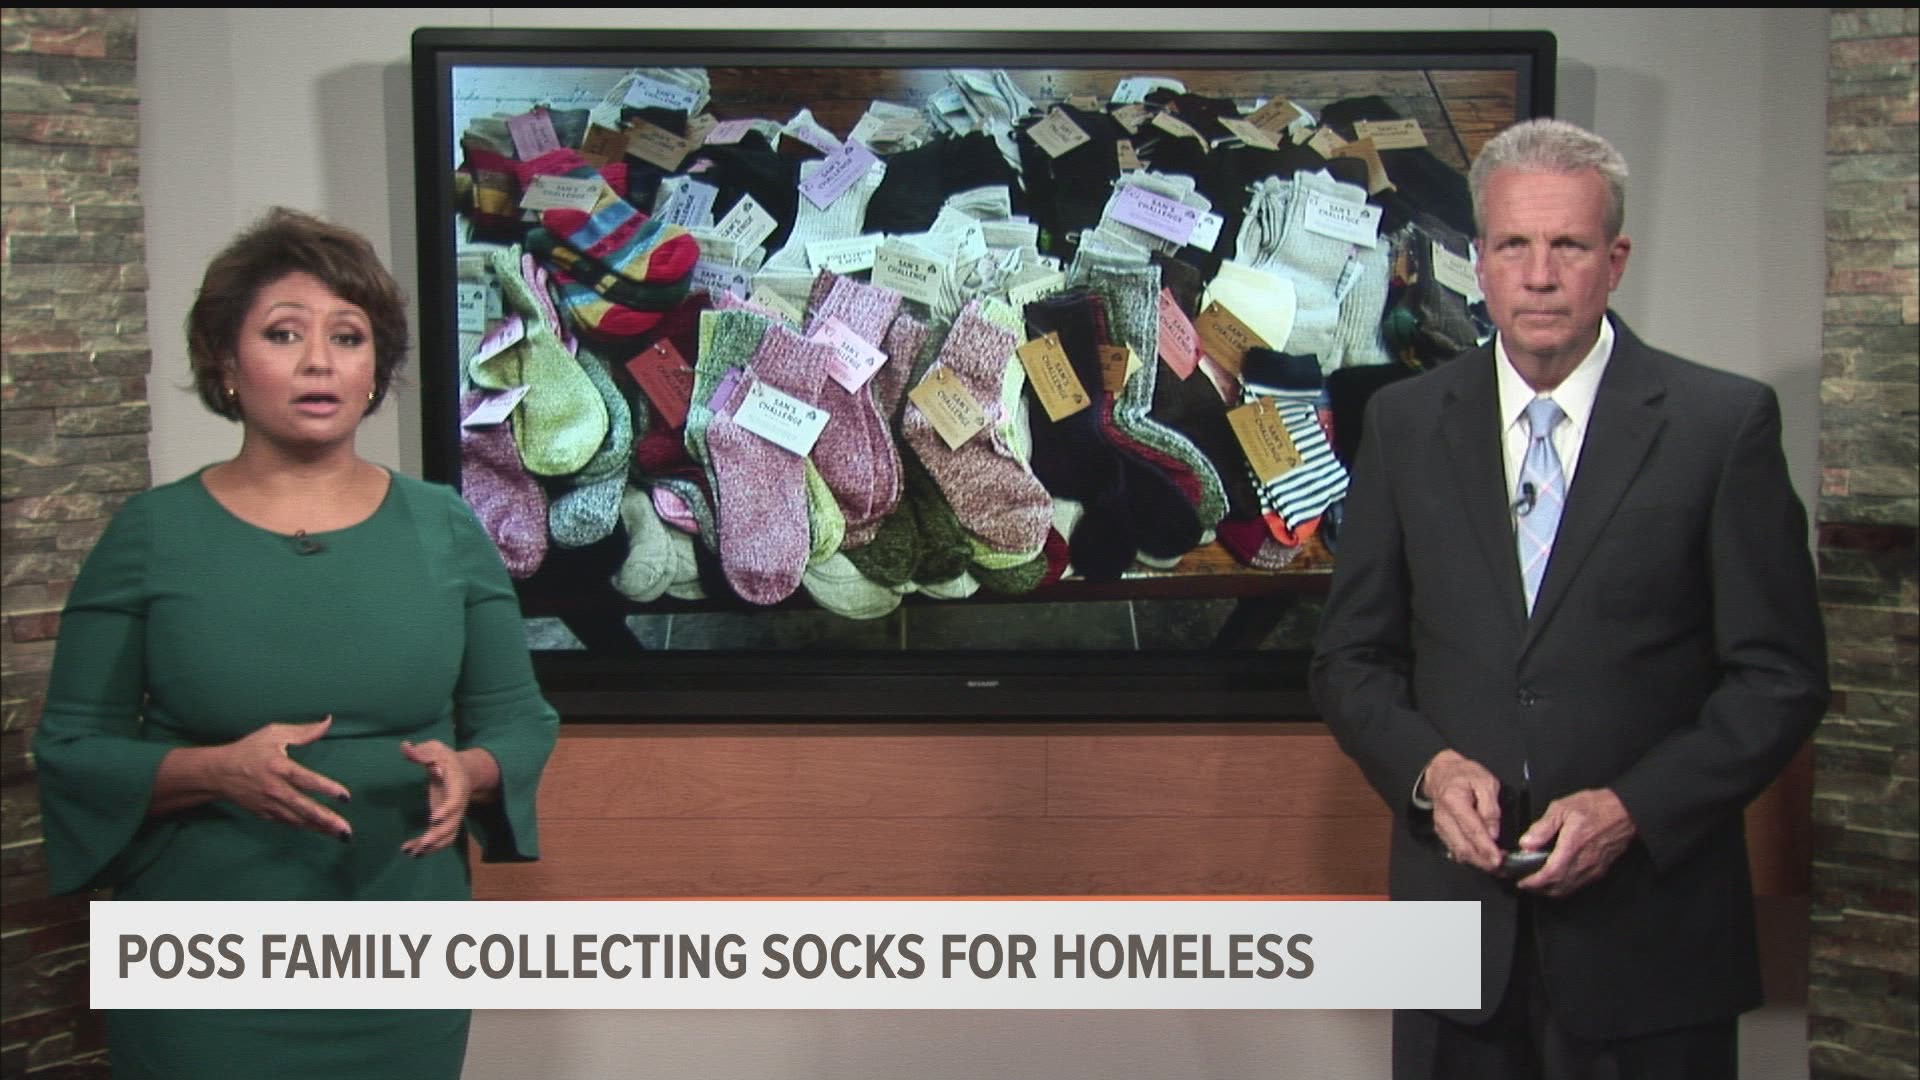 The slain Perry teen was known for wearing mismatched socks, so his family came up with "Sam's Challenge" to donate pairs to the homeless.